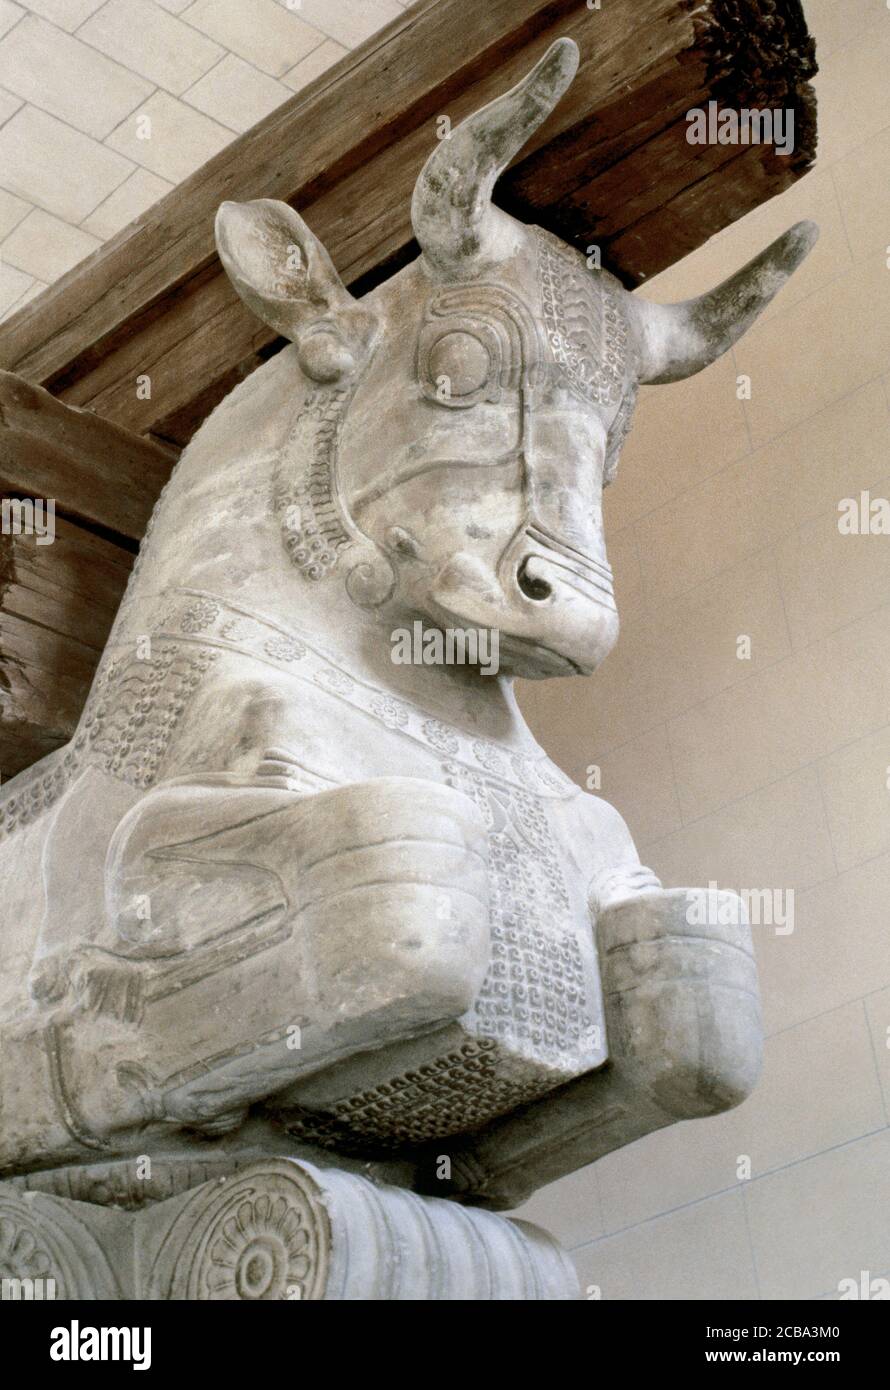 Double Bull-capital of a column from the audience hall of the palace of Darius I. Detail of the colossal capital from one of the columns which supported the roof of the apadana at Susa. Iran. Gray limestone, ca. 510 BC. Detail. Louvre Museum. Paris, France. Stock Photo